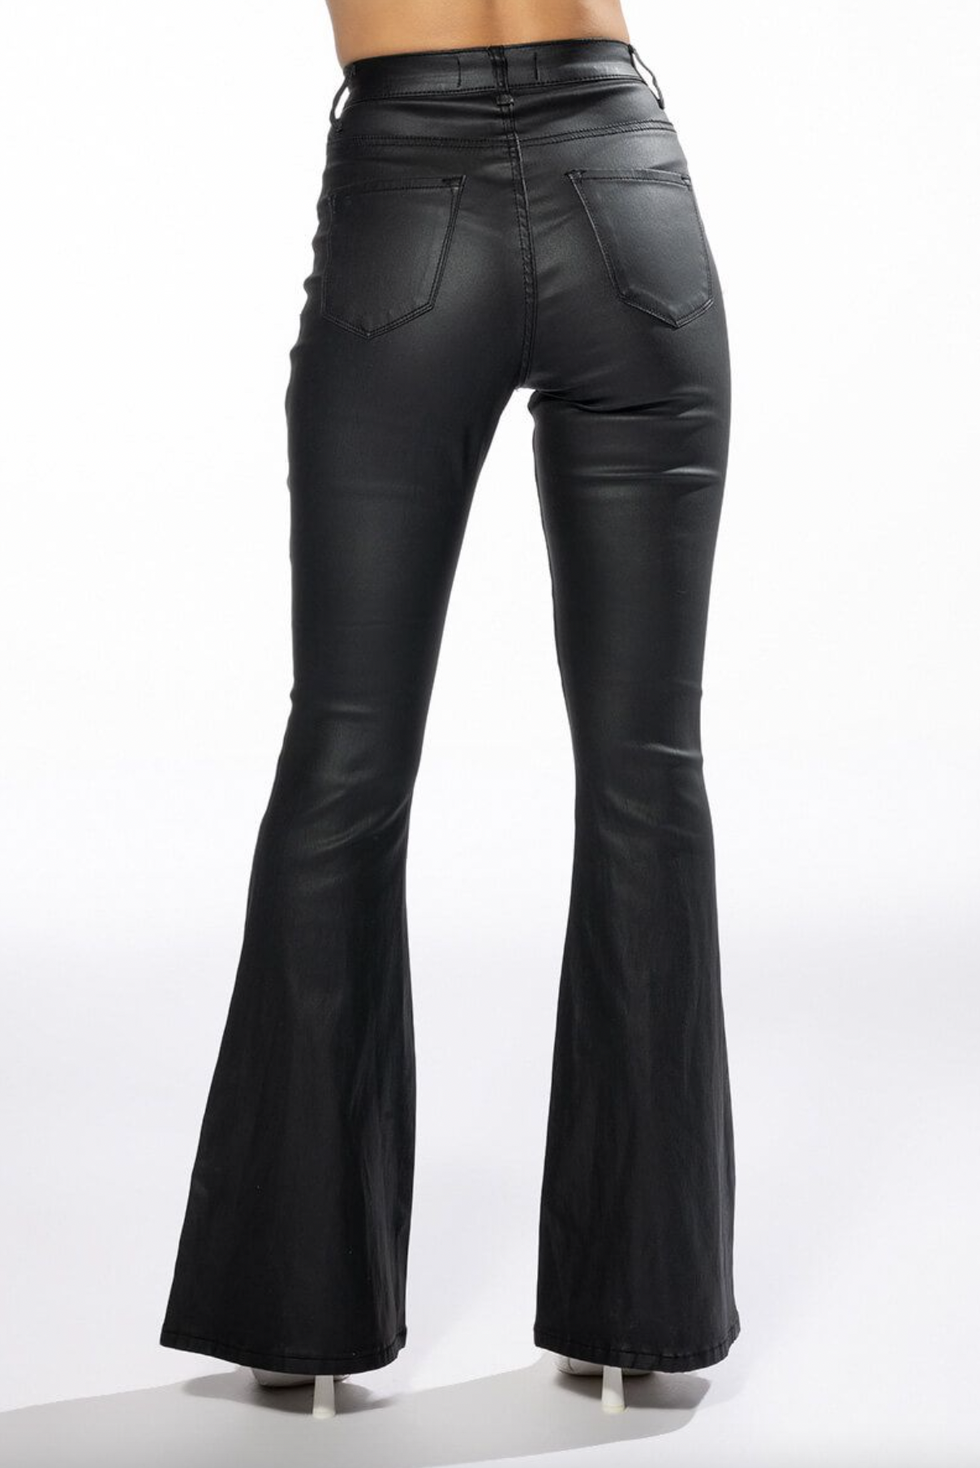 How to Style Leather Pants 2024 - Leather Pants Outfit Ideas